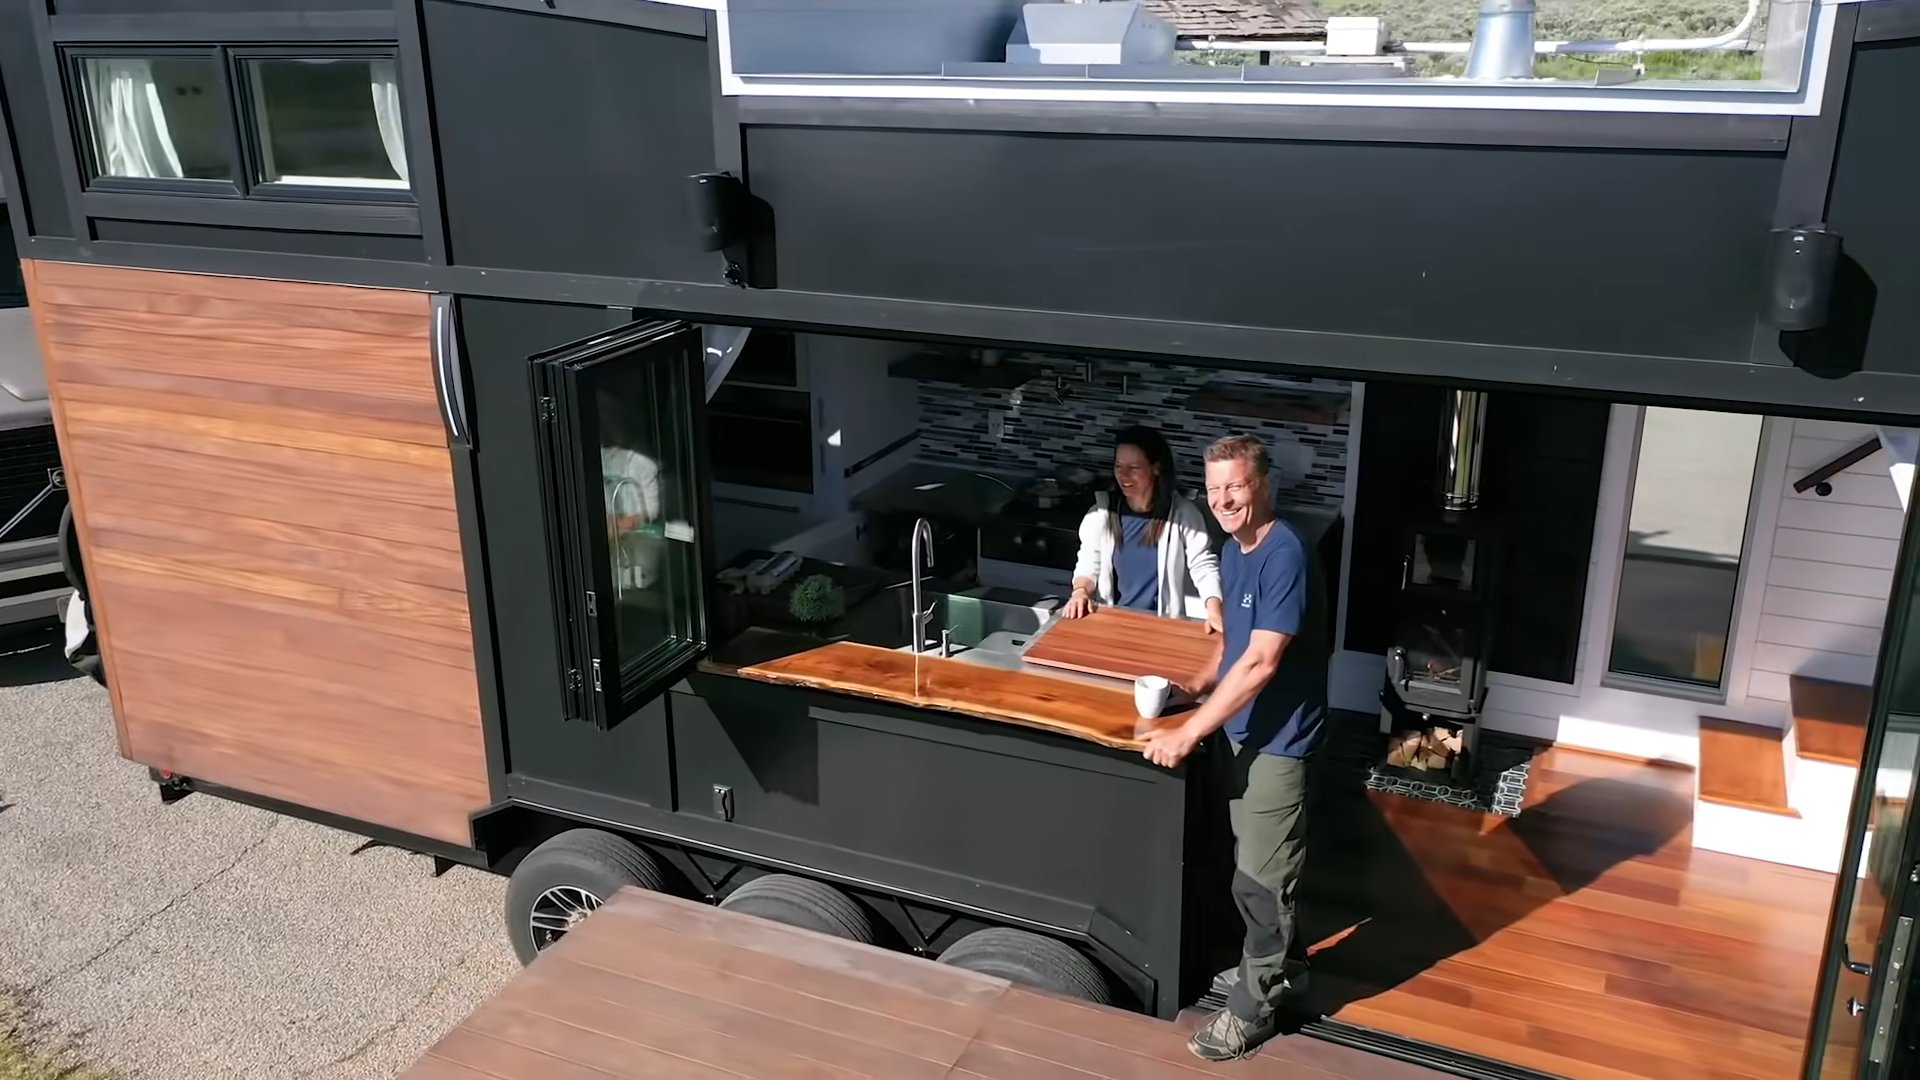 They-Sold-Their-5000-Sq.-Ft.-Home-Built-A-Luxury-DIY-Tiny-House-008